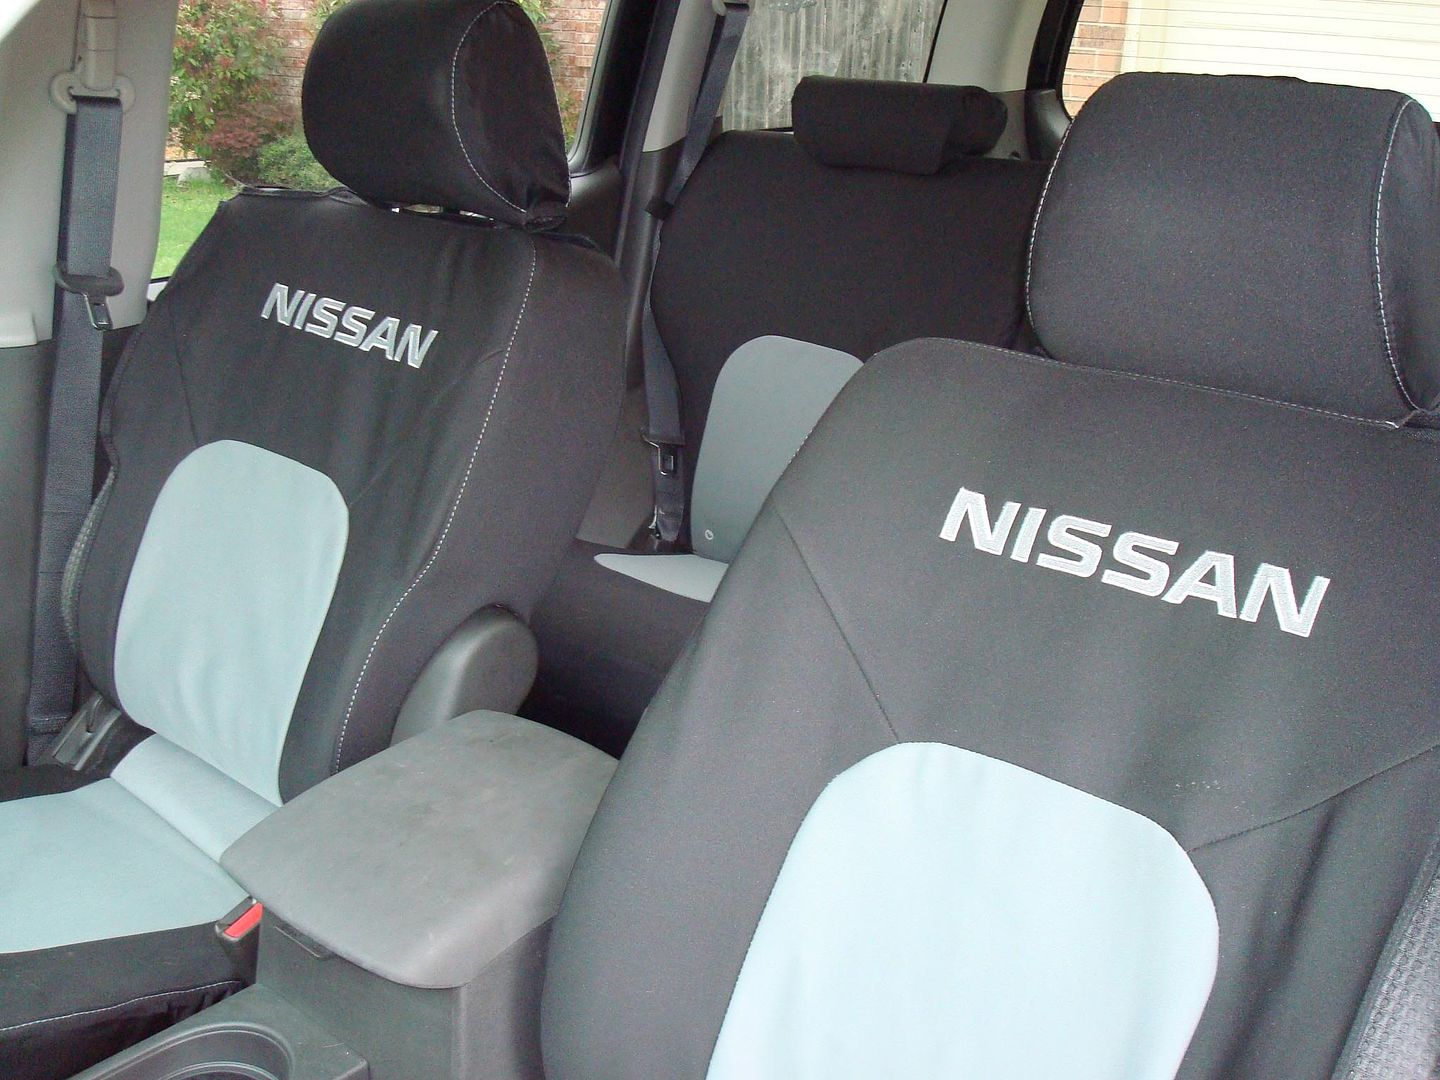 Nissan water-resistant seat covers #9